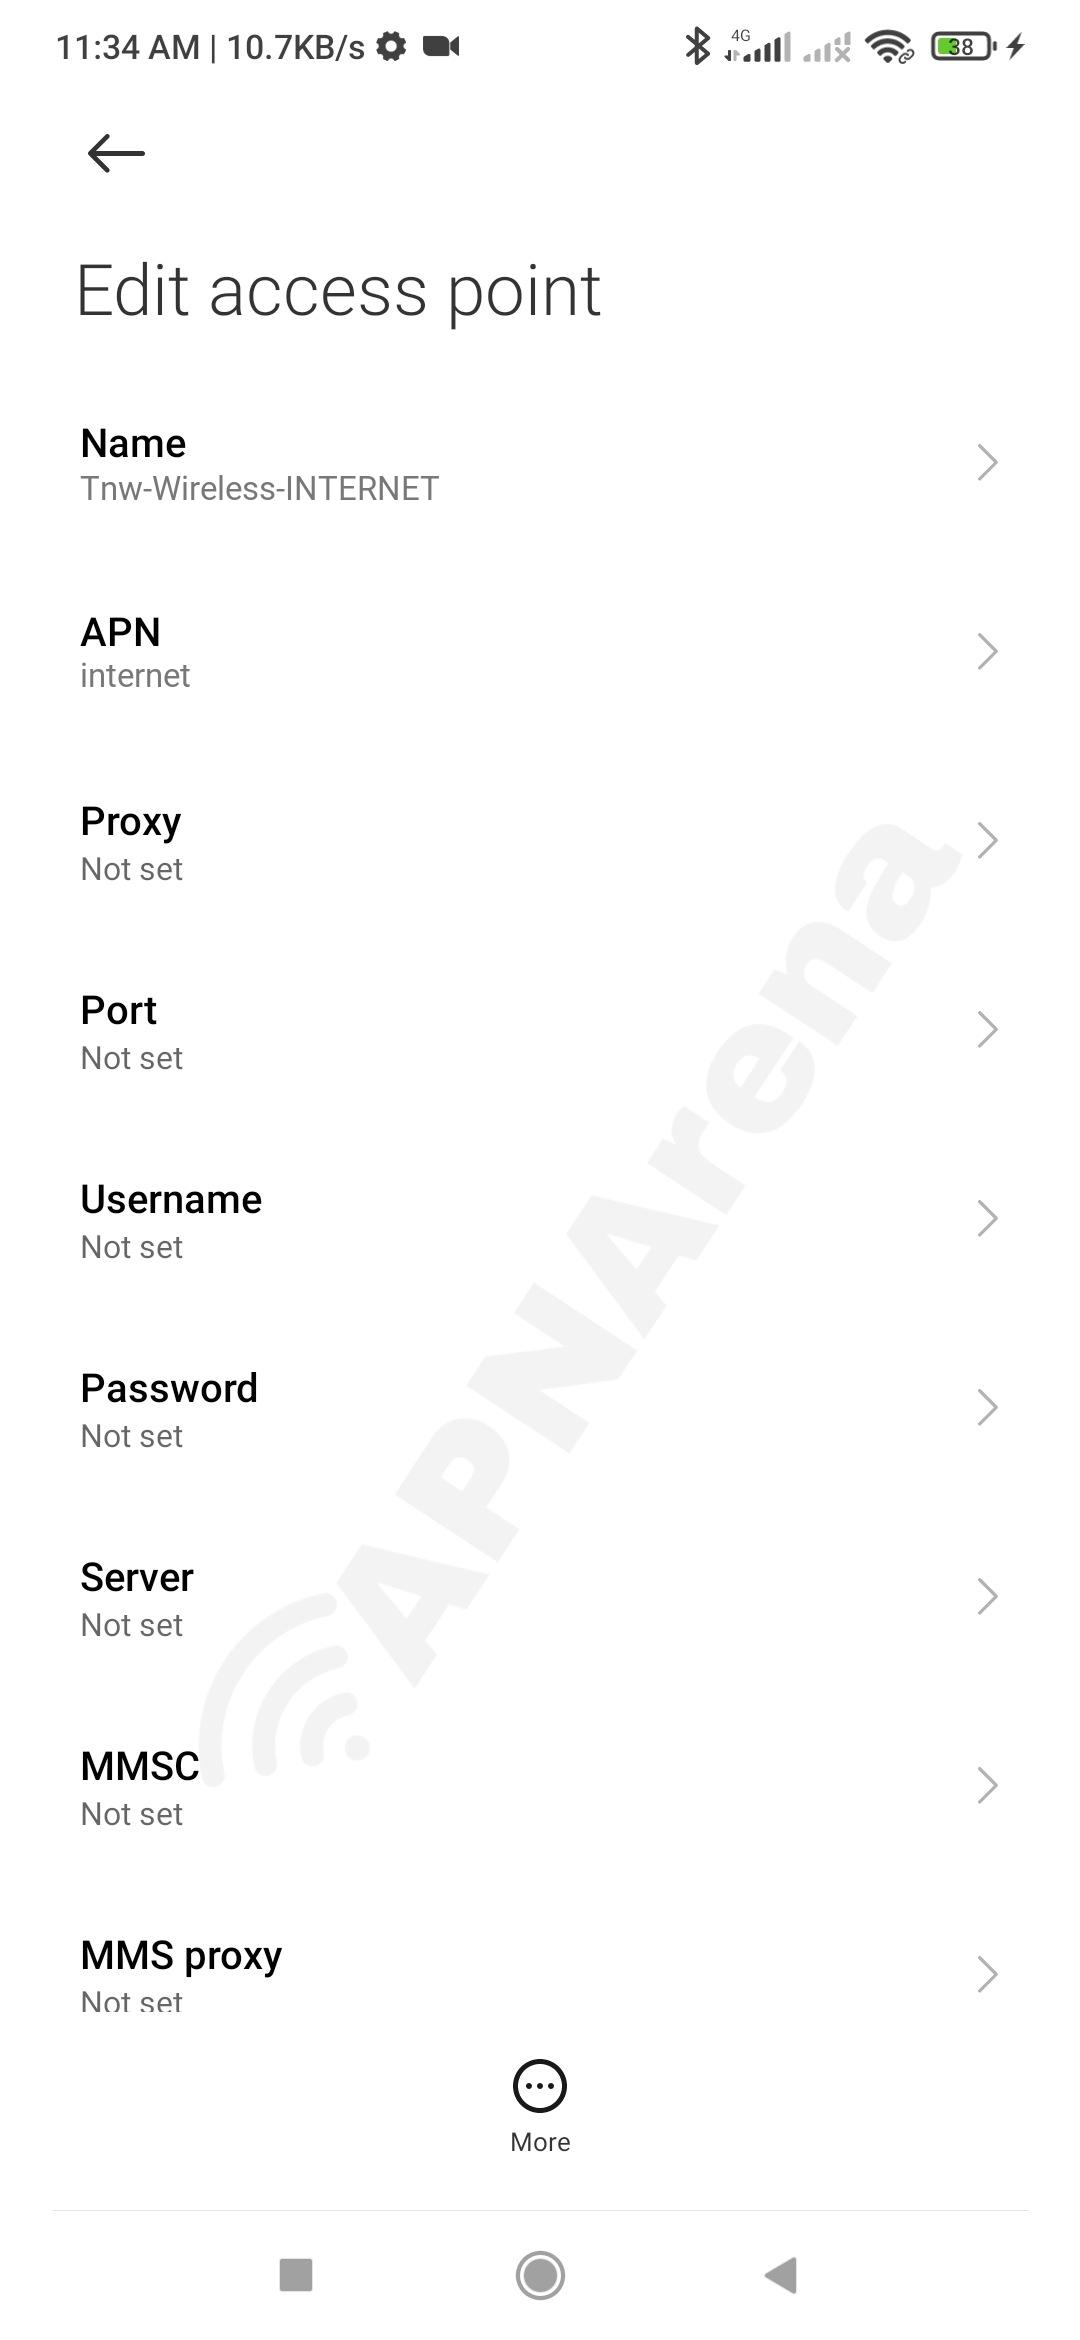 TNW Wireless APN Settings for Android